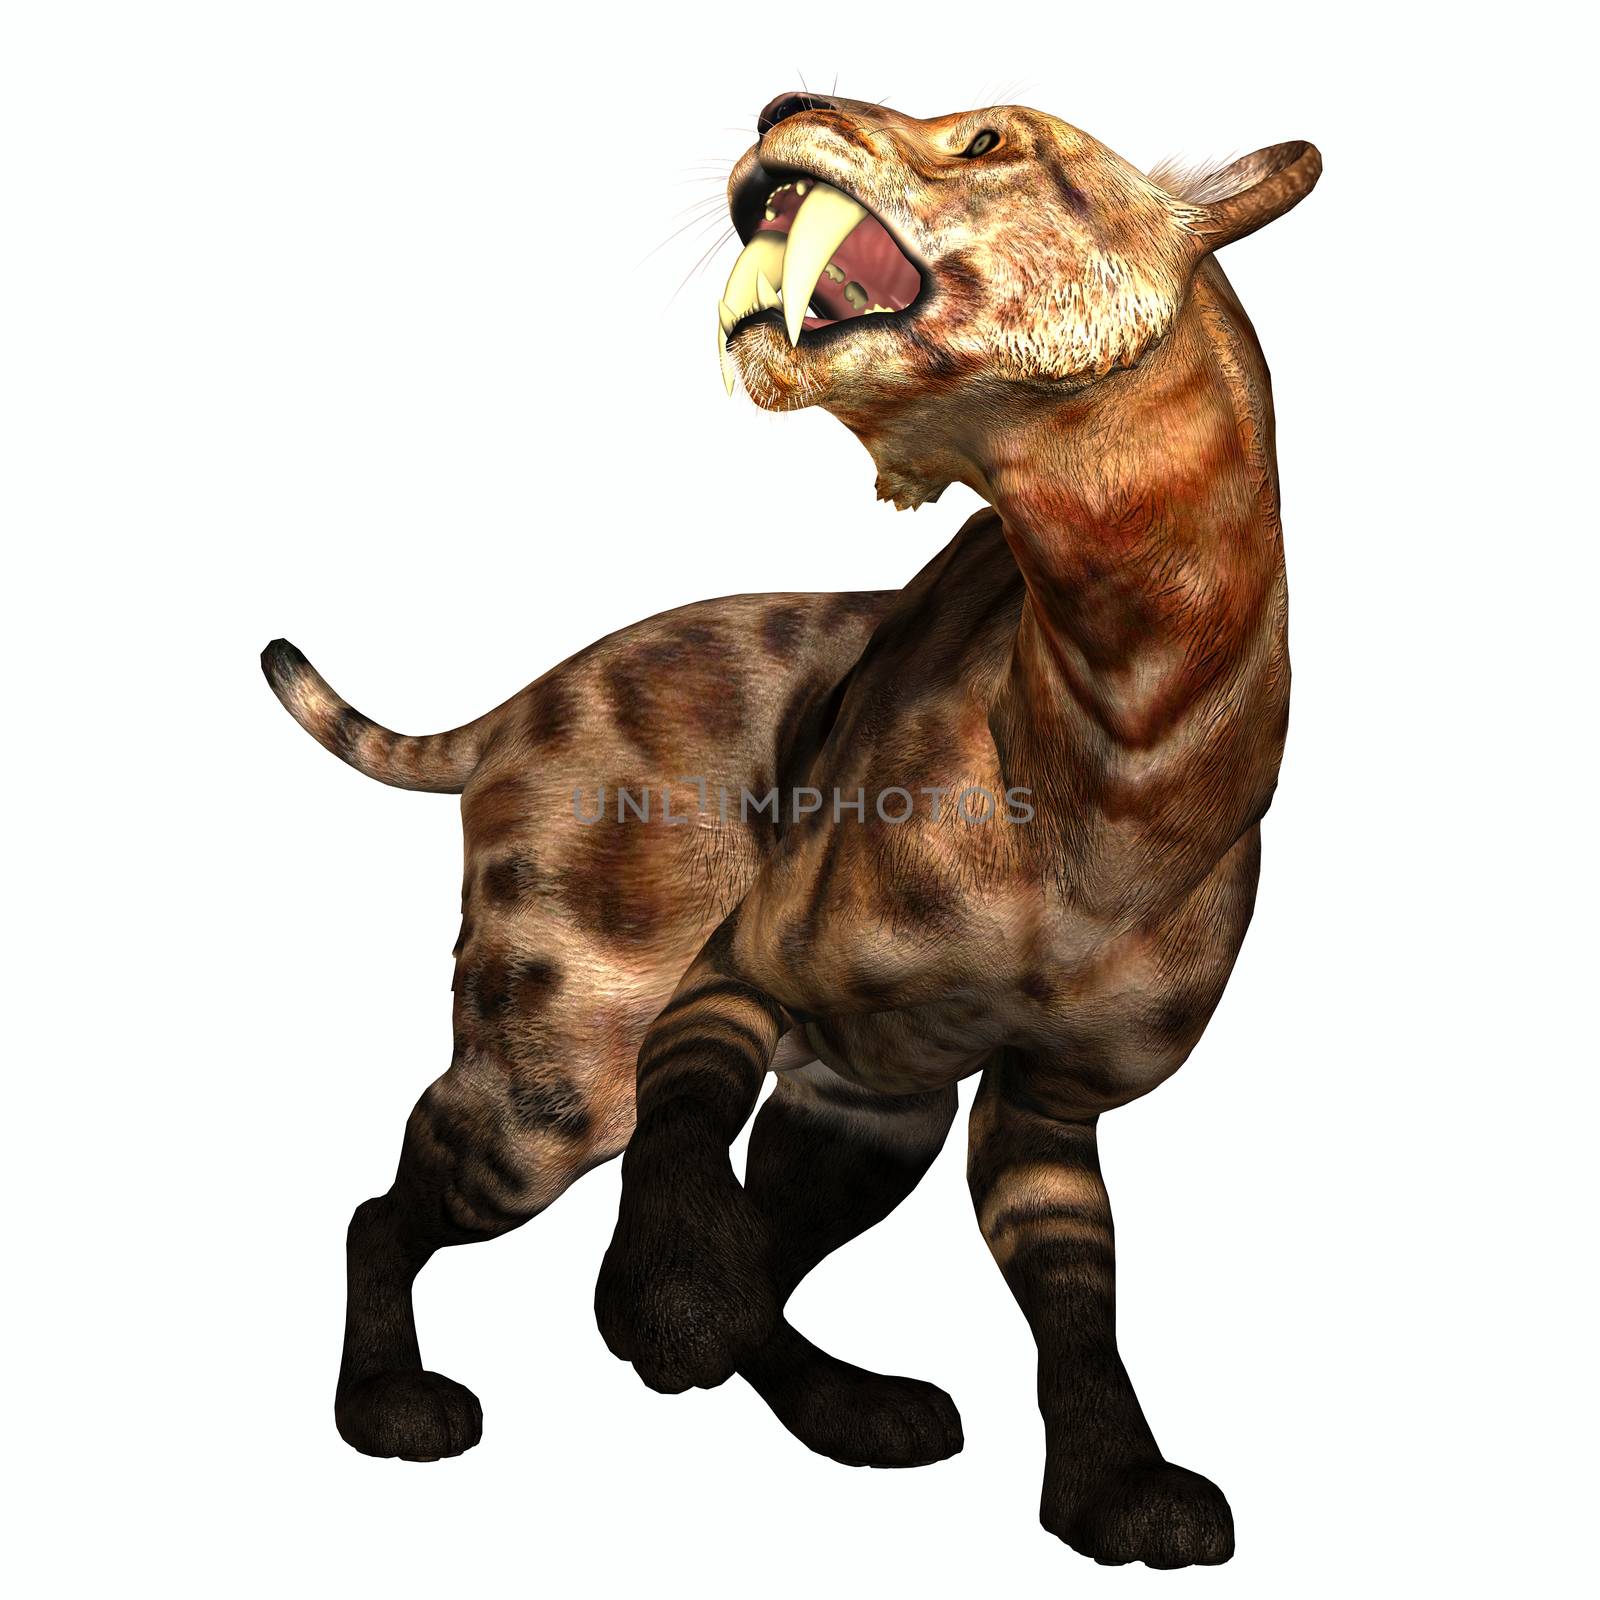 Saber-tooth Cat on White by Catmando